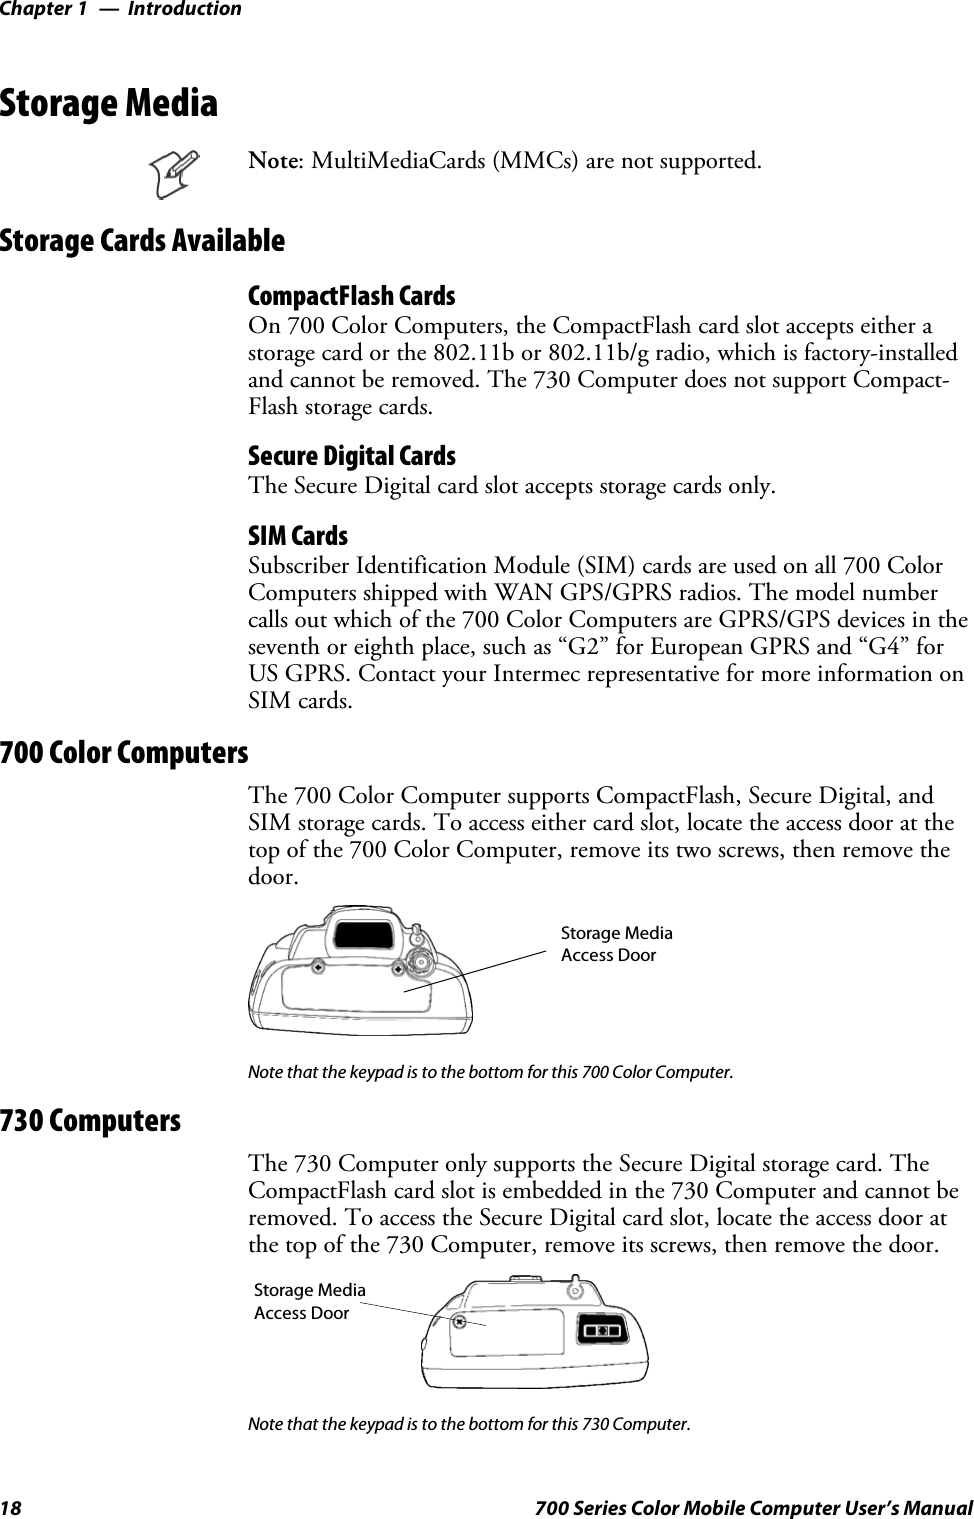 IntroductionChapter —118 700 Series Color Mobile Computer User’s ManualStorage MediaNote: MultiMediaCards (MMCs) are not supported.Storage Cards AvailableCompactFlash CardsOn 700 Color Computers, the CompactFlash card slot accepts either astorage card or the 802.11b or 802.11b/g radio, which is factory-installedand cannot be removed. The 730 Computer does not support Compact-Flash storage cards.Secure Digital CardsThe Secure Digital card slot accepts storage cards only.SIM CardsSubscriber Identification Module (SIM) cards are used on all 700 ColorComputers shipped with WAN GPS/GPRS radios. The model numbercalls out which of the 700 Color Computers are GPRS/GPS devices in theseventh or eighth place, such as “G2” for European GPRS and “G4” forUS GPRS. Contact your Intermec representative for more information onSIM cards.700 Color ComputersThe 700 Color Computer supports CompactFlash, Secure Digital, andSIM storage cards. To access either card slot, locate the access door at thetop of the 700 Color Computer, remove its two screws, then remove thedoor.Storage MediaAccess DoorNote that the keypad is to the bottom for this 700 Color Computer.730 ComputersThe 730 Computer only supports the Secure Digital storage card. TheCompactFlash card slot is embedded in the 730 Computer and cannot beremoved. To access the Secure Digital card slot, locate the access door atthe top of the 730 Computer, remove its screws, then remove the door.Storage MediaAccess DoorNote that the keypad is to the bottom for this 730 Computer.